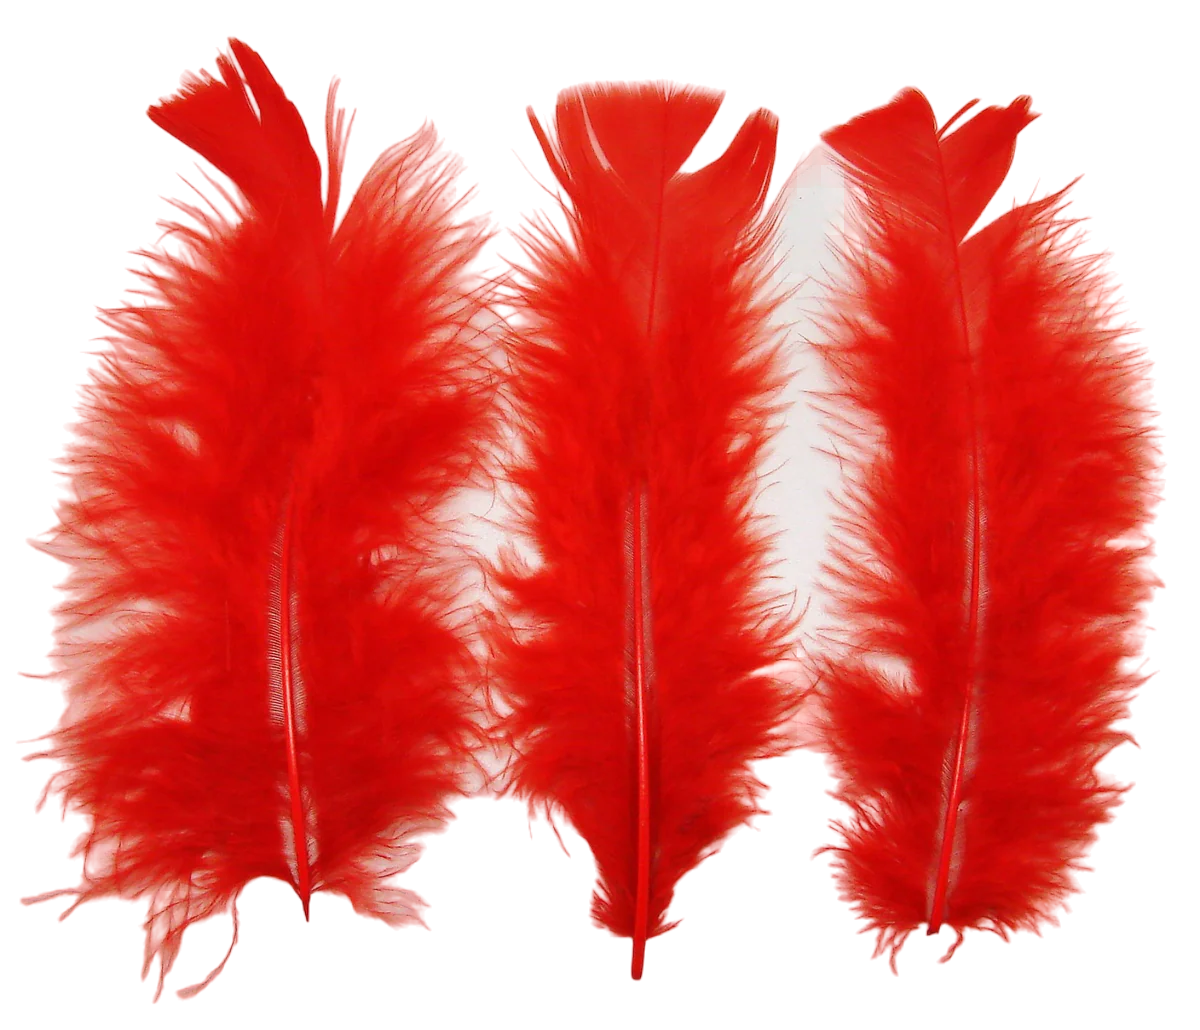 100pcs Red Goose Feathers 6-8 Inch for Crafts Wedding Party